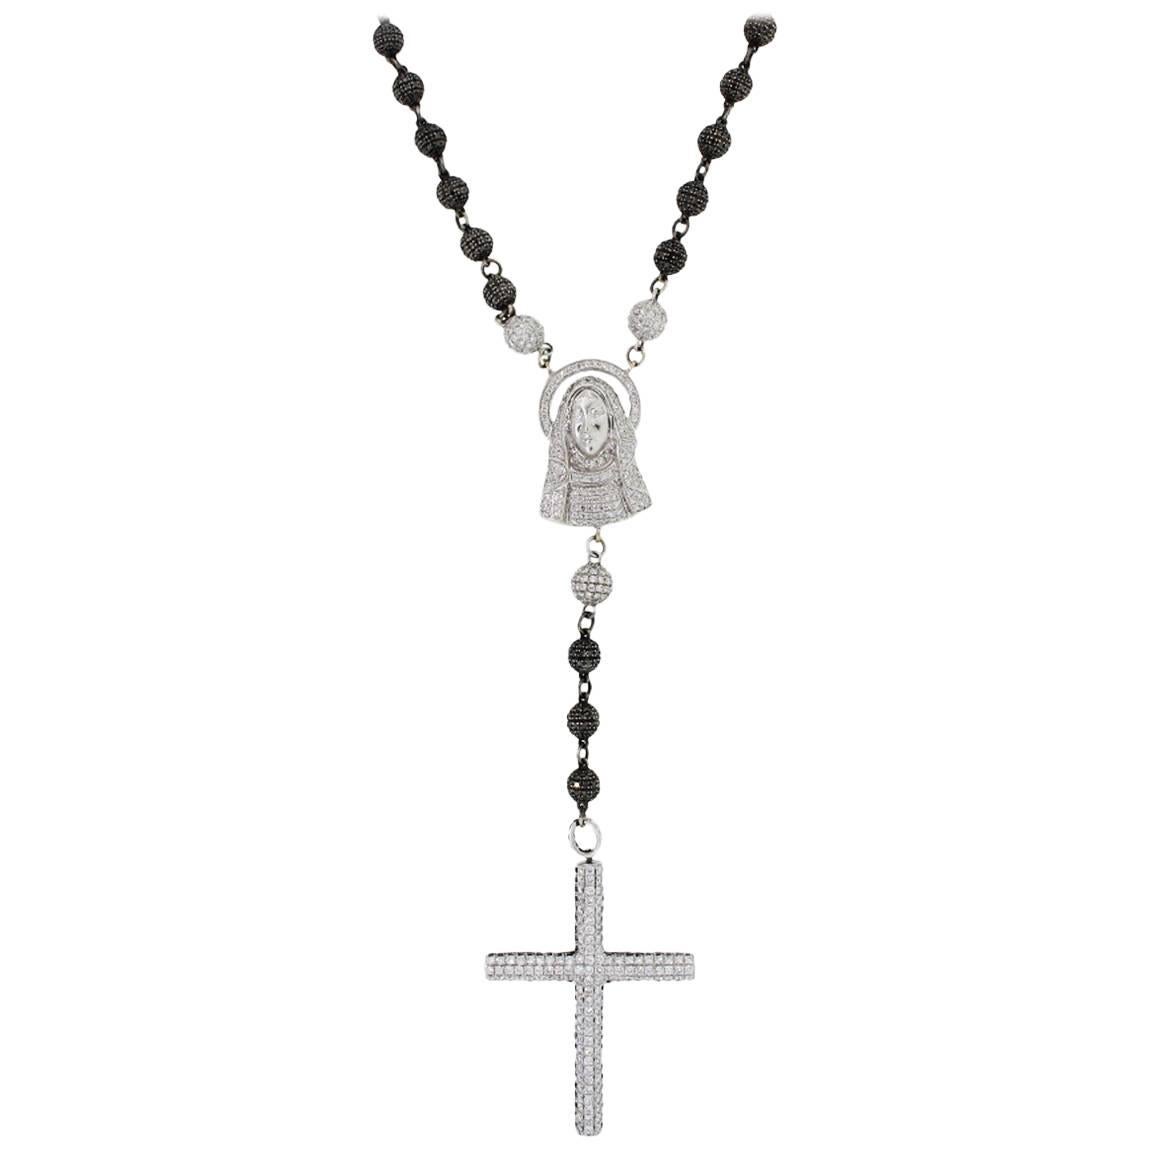 Black and White Diamond Cross Rosary Necklace